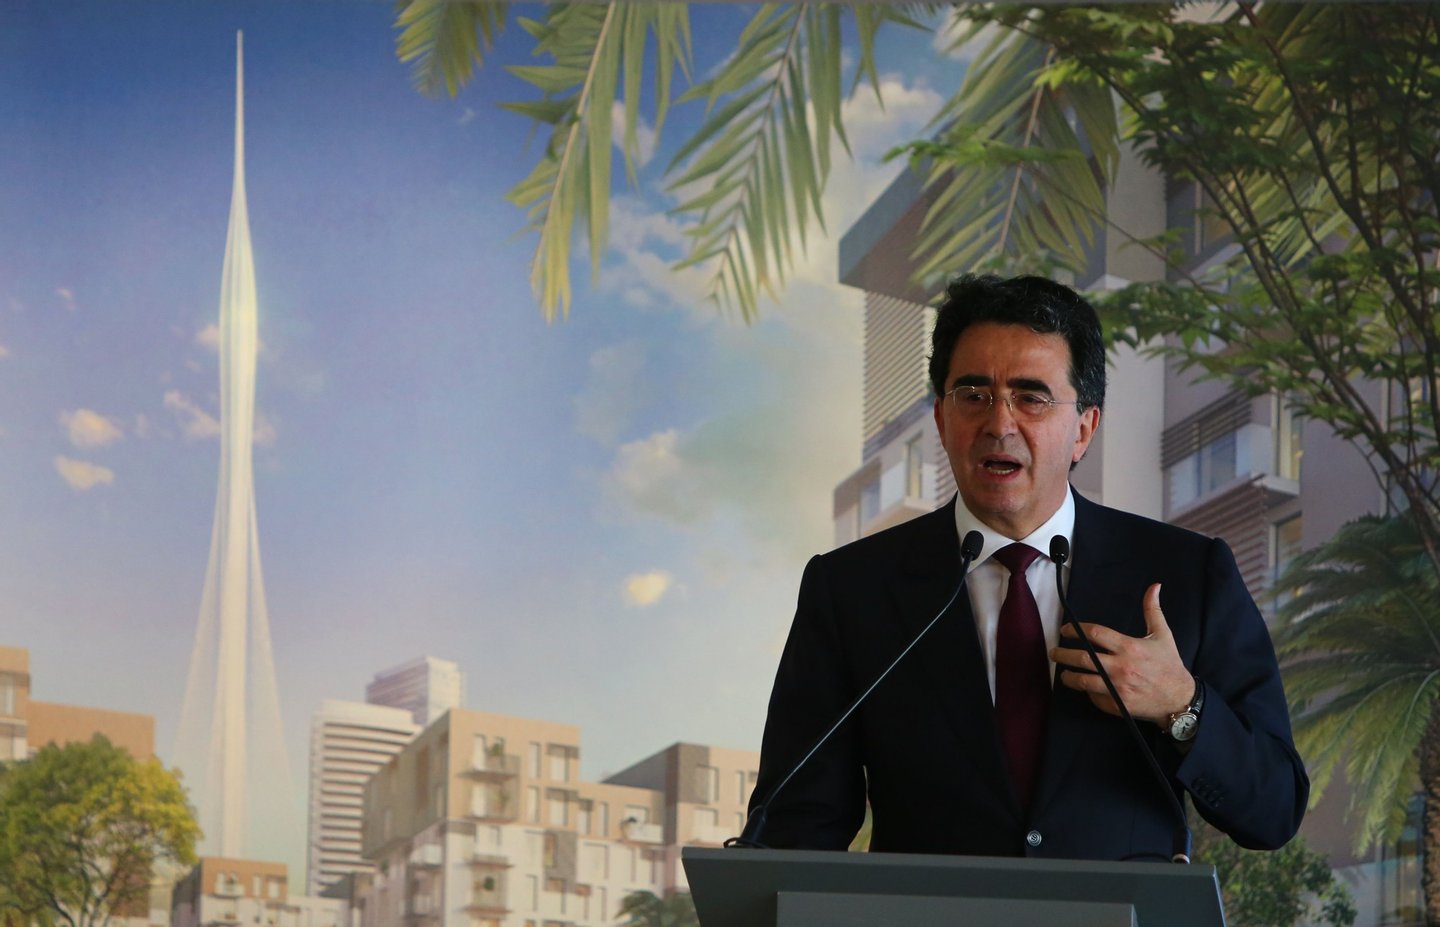 Spanish-Swiss architect Santiago Calatrava Valls, speaks to press in Dubai, April 10, 2016, during a exposition to reveal the plans of Dubai Emaar Properties to build a new tower, designed by Valls that will be even taller than the Burj Khalifa, currently the world's tallest tower. The tower will be part of a new project called the Dubai Creek Harbour. / AFP / MARWAN NAAMANI (Photo credit should read MARWAN NAAMANI/AFP/Getty Images)